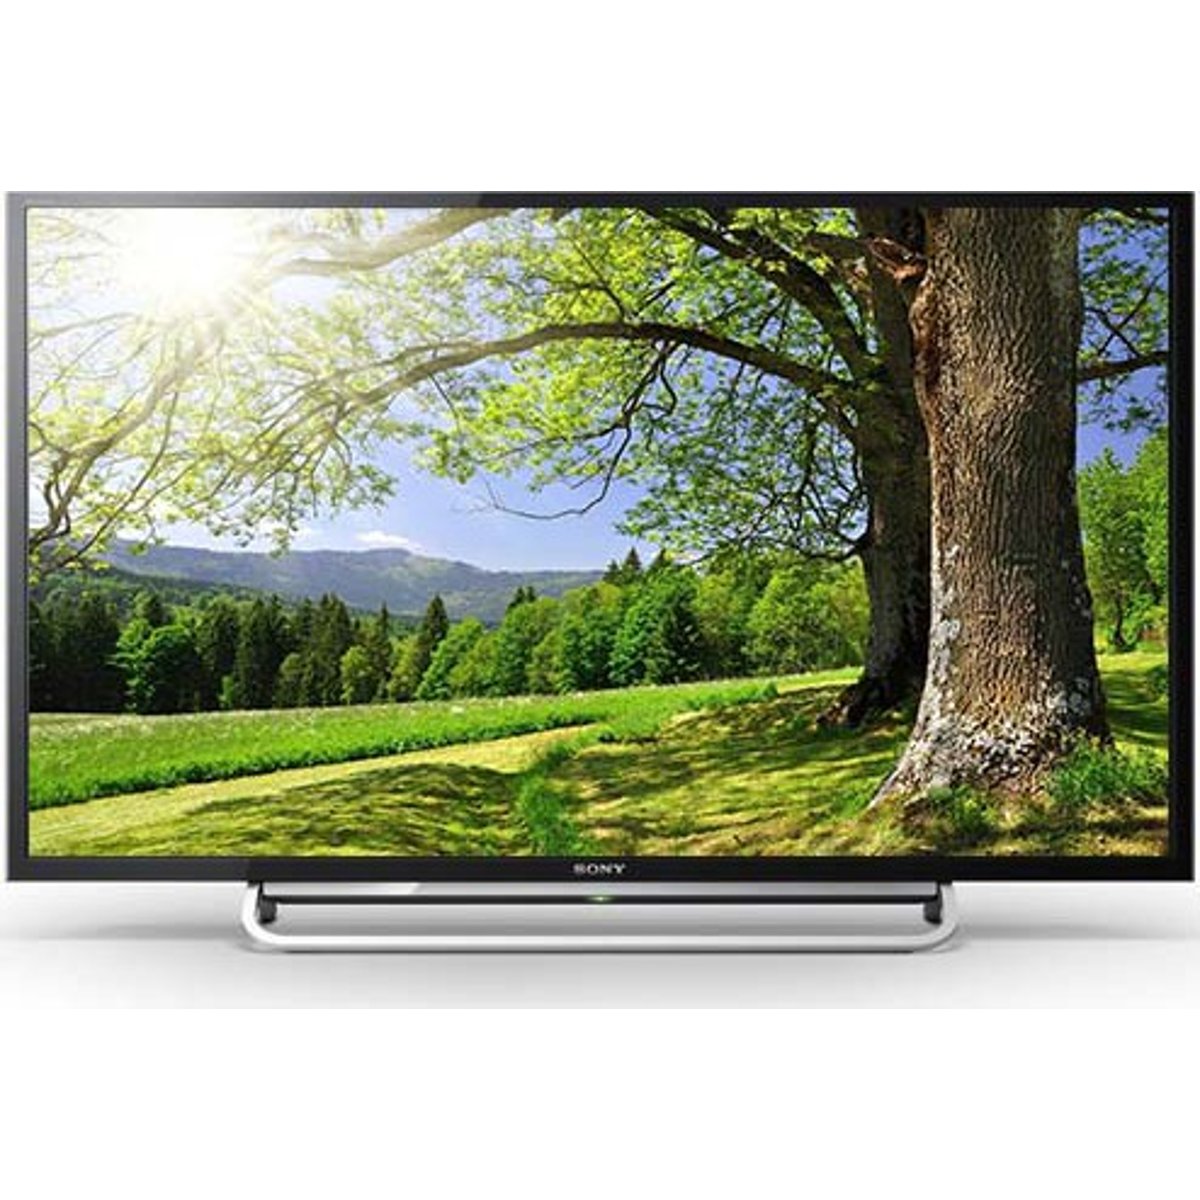 Buy Sony 60W600B Full HD Smart LED Television 60inch Online in 